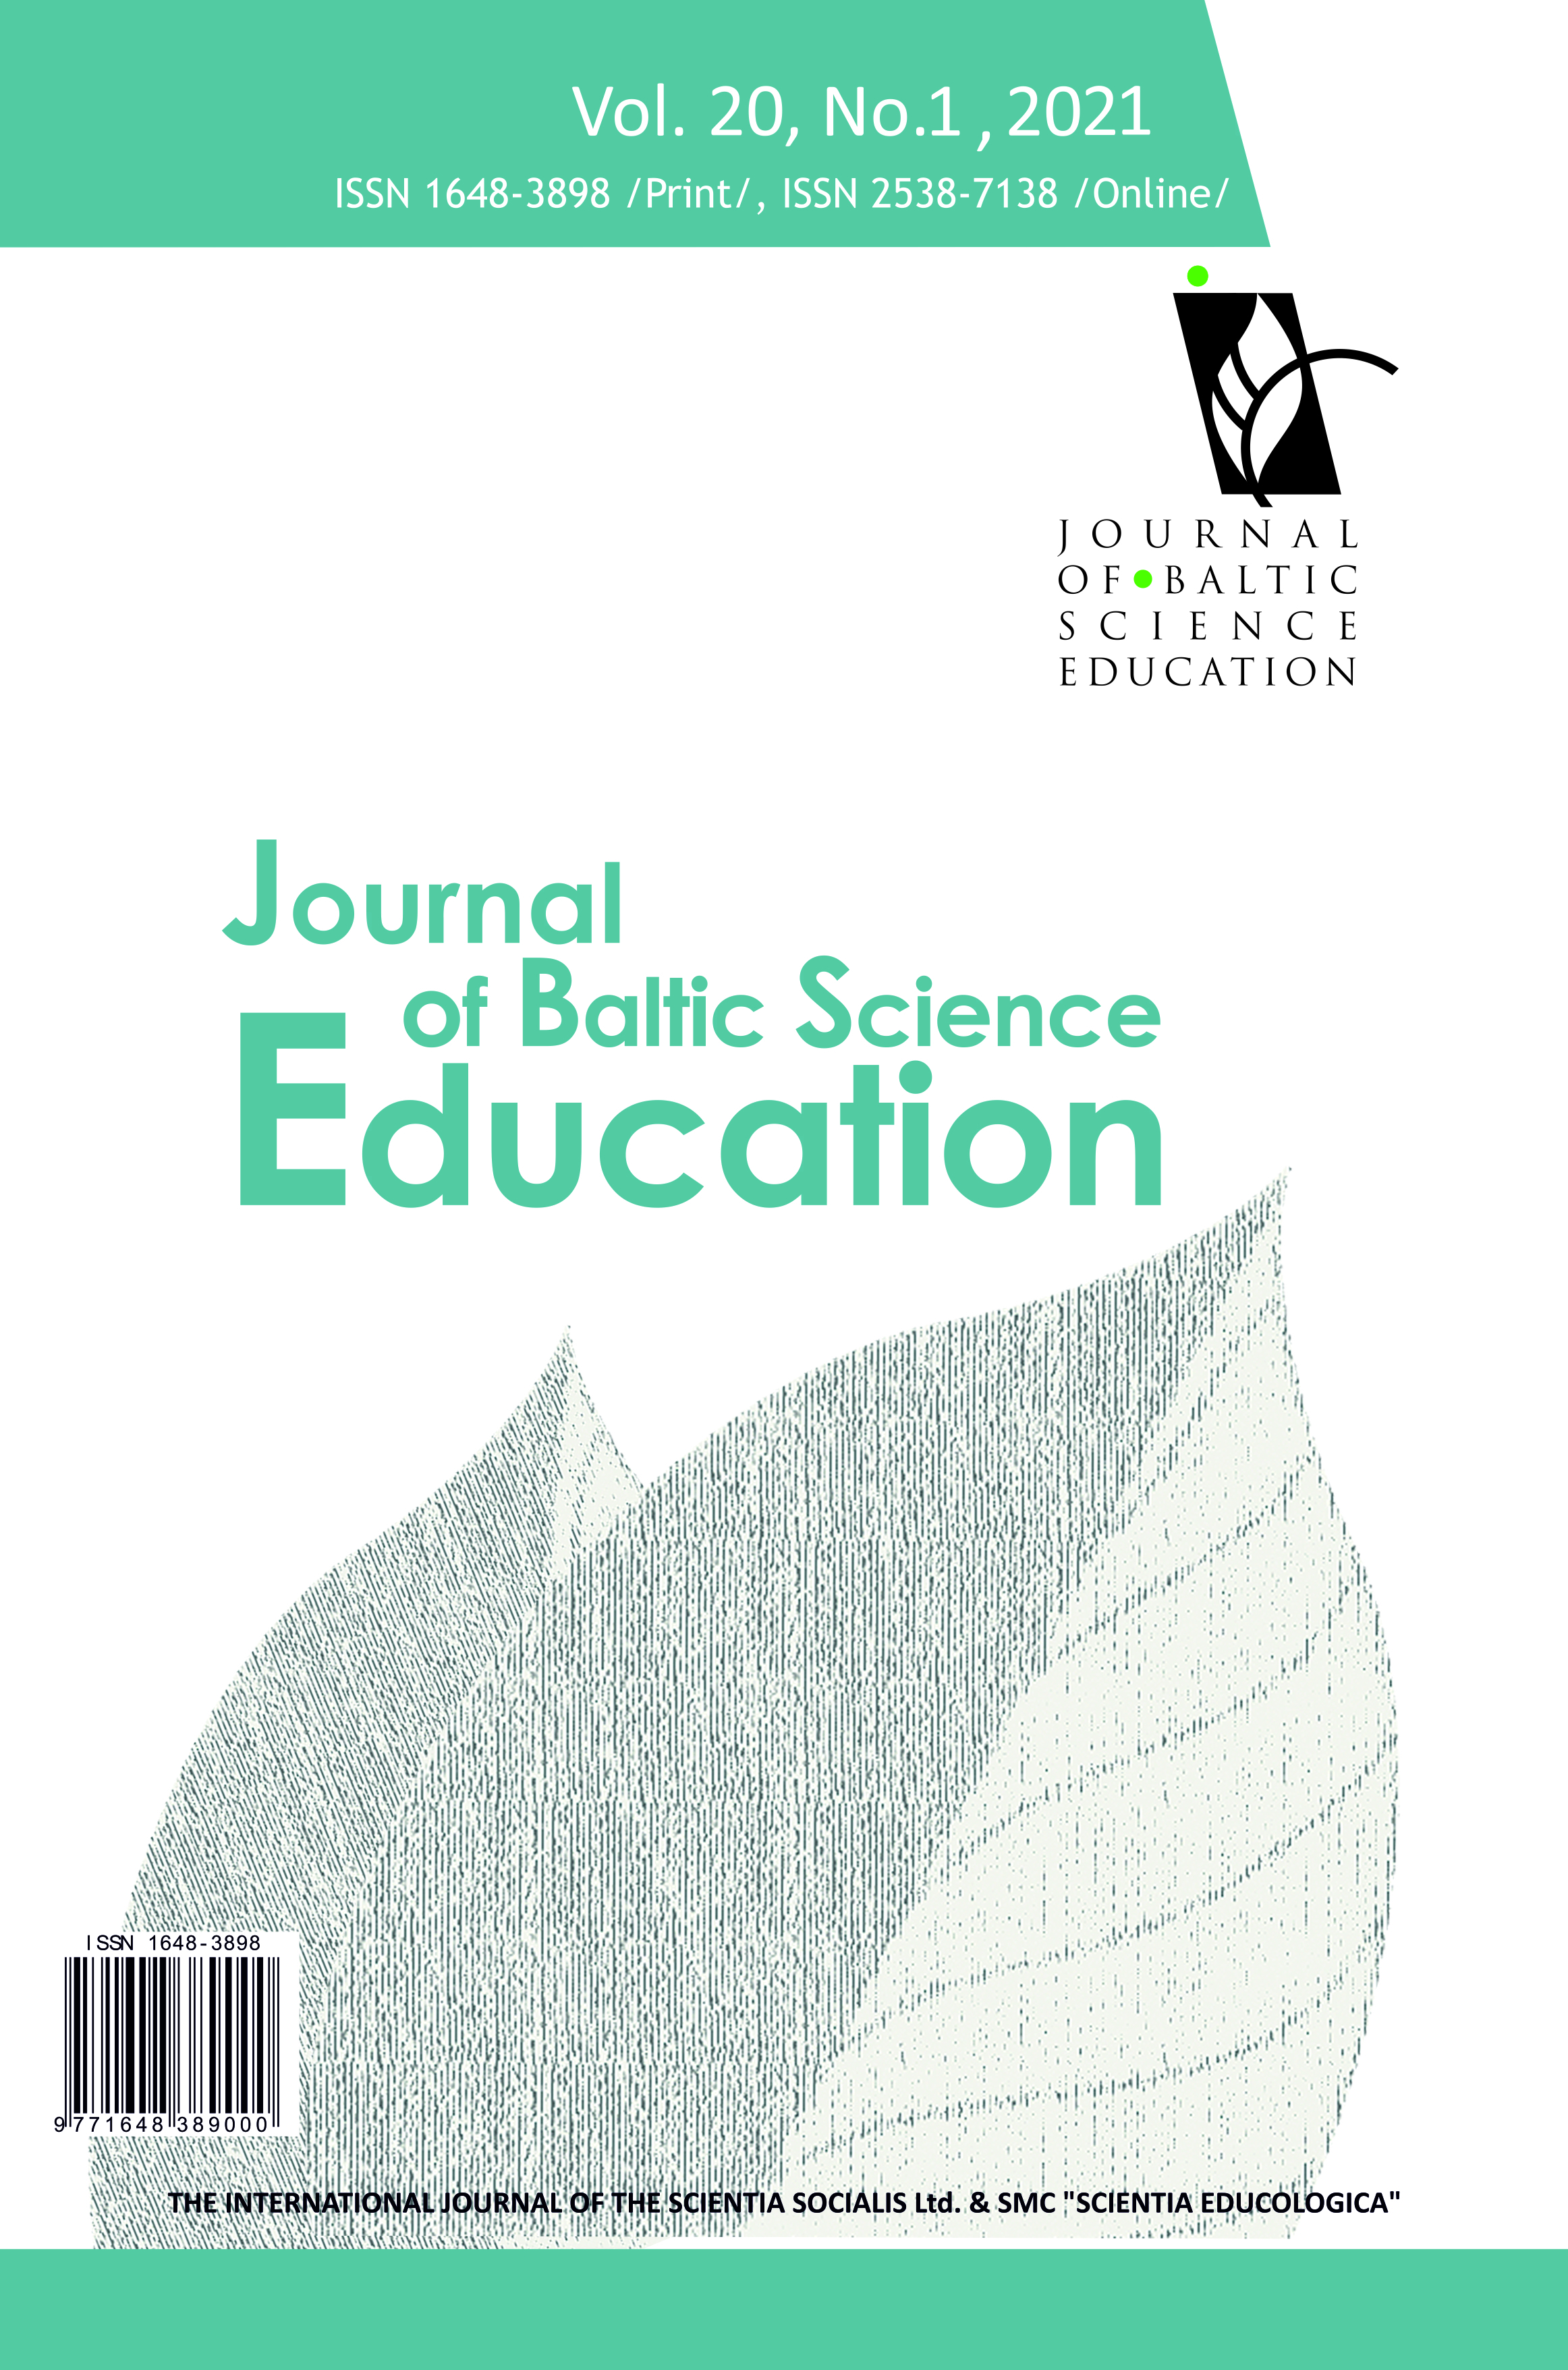 GRADE 6 & 9 STUDENT AND TEACHER PERCEPTIONS OF TEACHING AND LEARNING APPROACHES IN RELATION TO STUDENT PERCEIVED INTEREST/ENJOYMENT TOWARDS SCIENCE LEARNING Cover Image